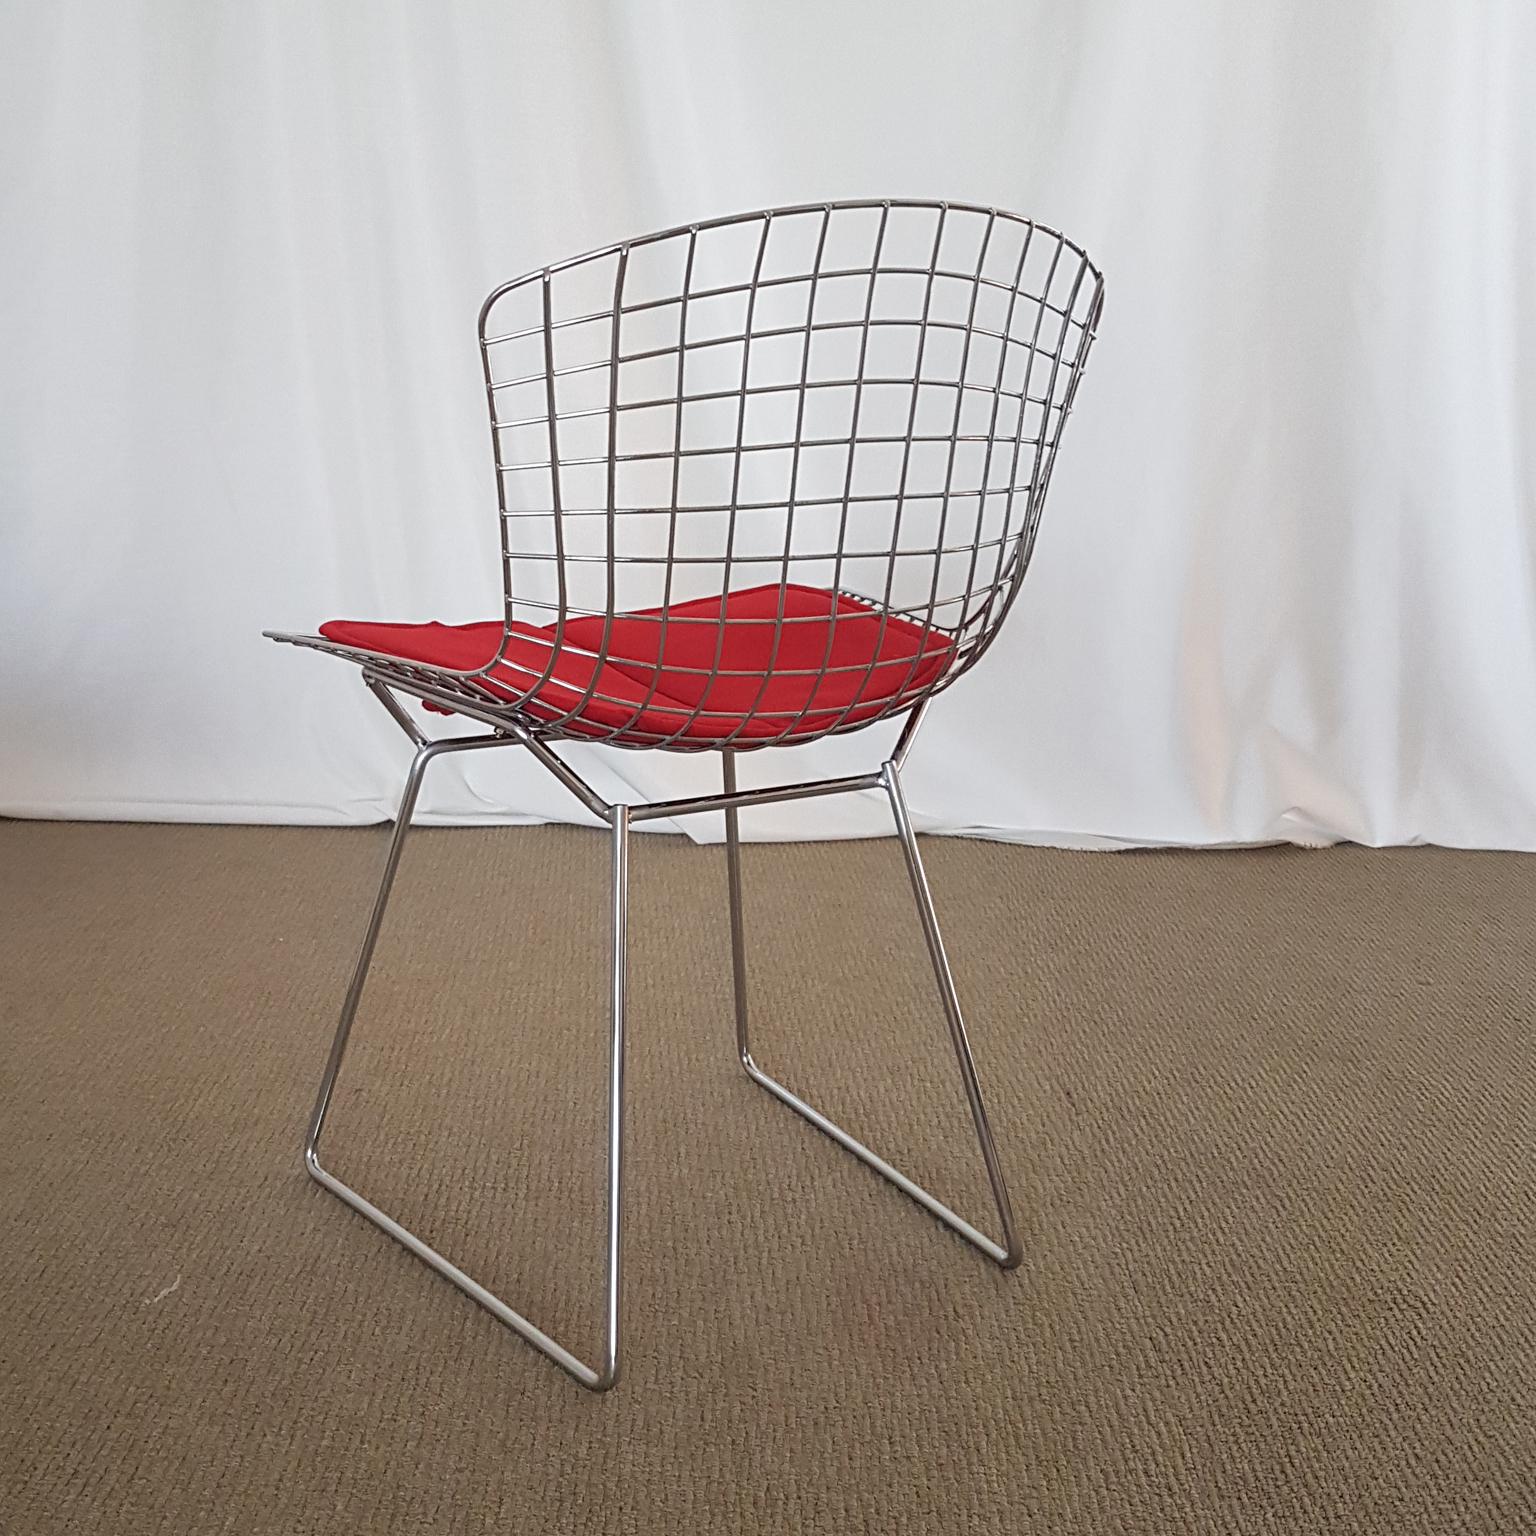 Polished Harry Bertoia Italian Steel Wire Side Chair with Red Cushion, Mid-Century Modern For Sale